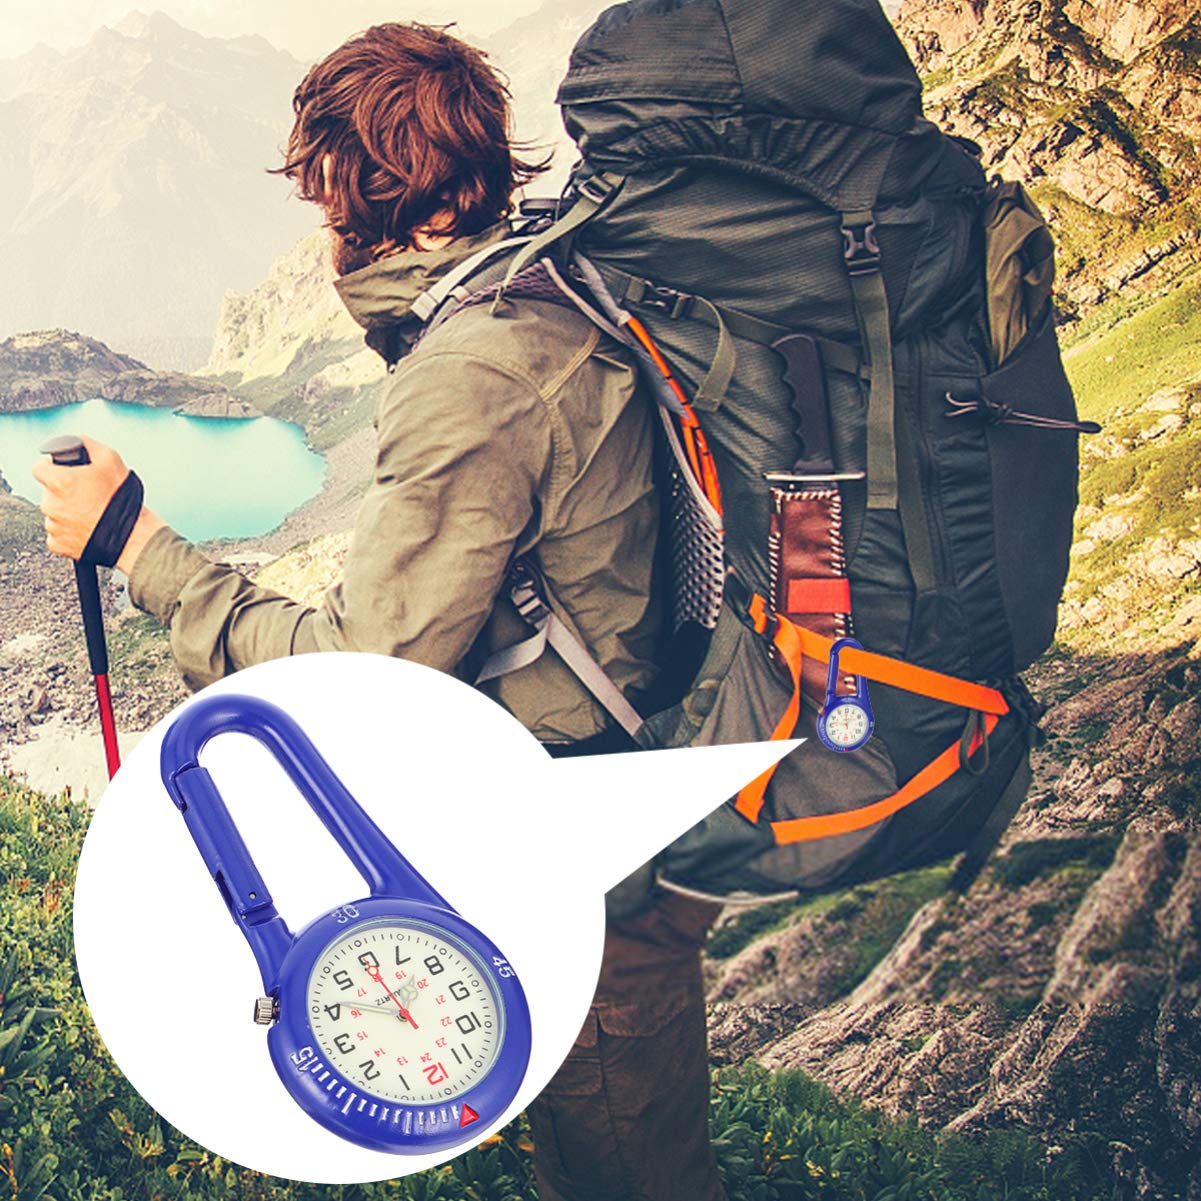 VOSAREA Clip-on Watch Glow in The Dark Dial Watch Night Light Backpack Buckle Belt Fob Watch for Rock Climbing Mountaineering Hiking Camping Blue